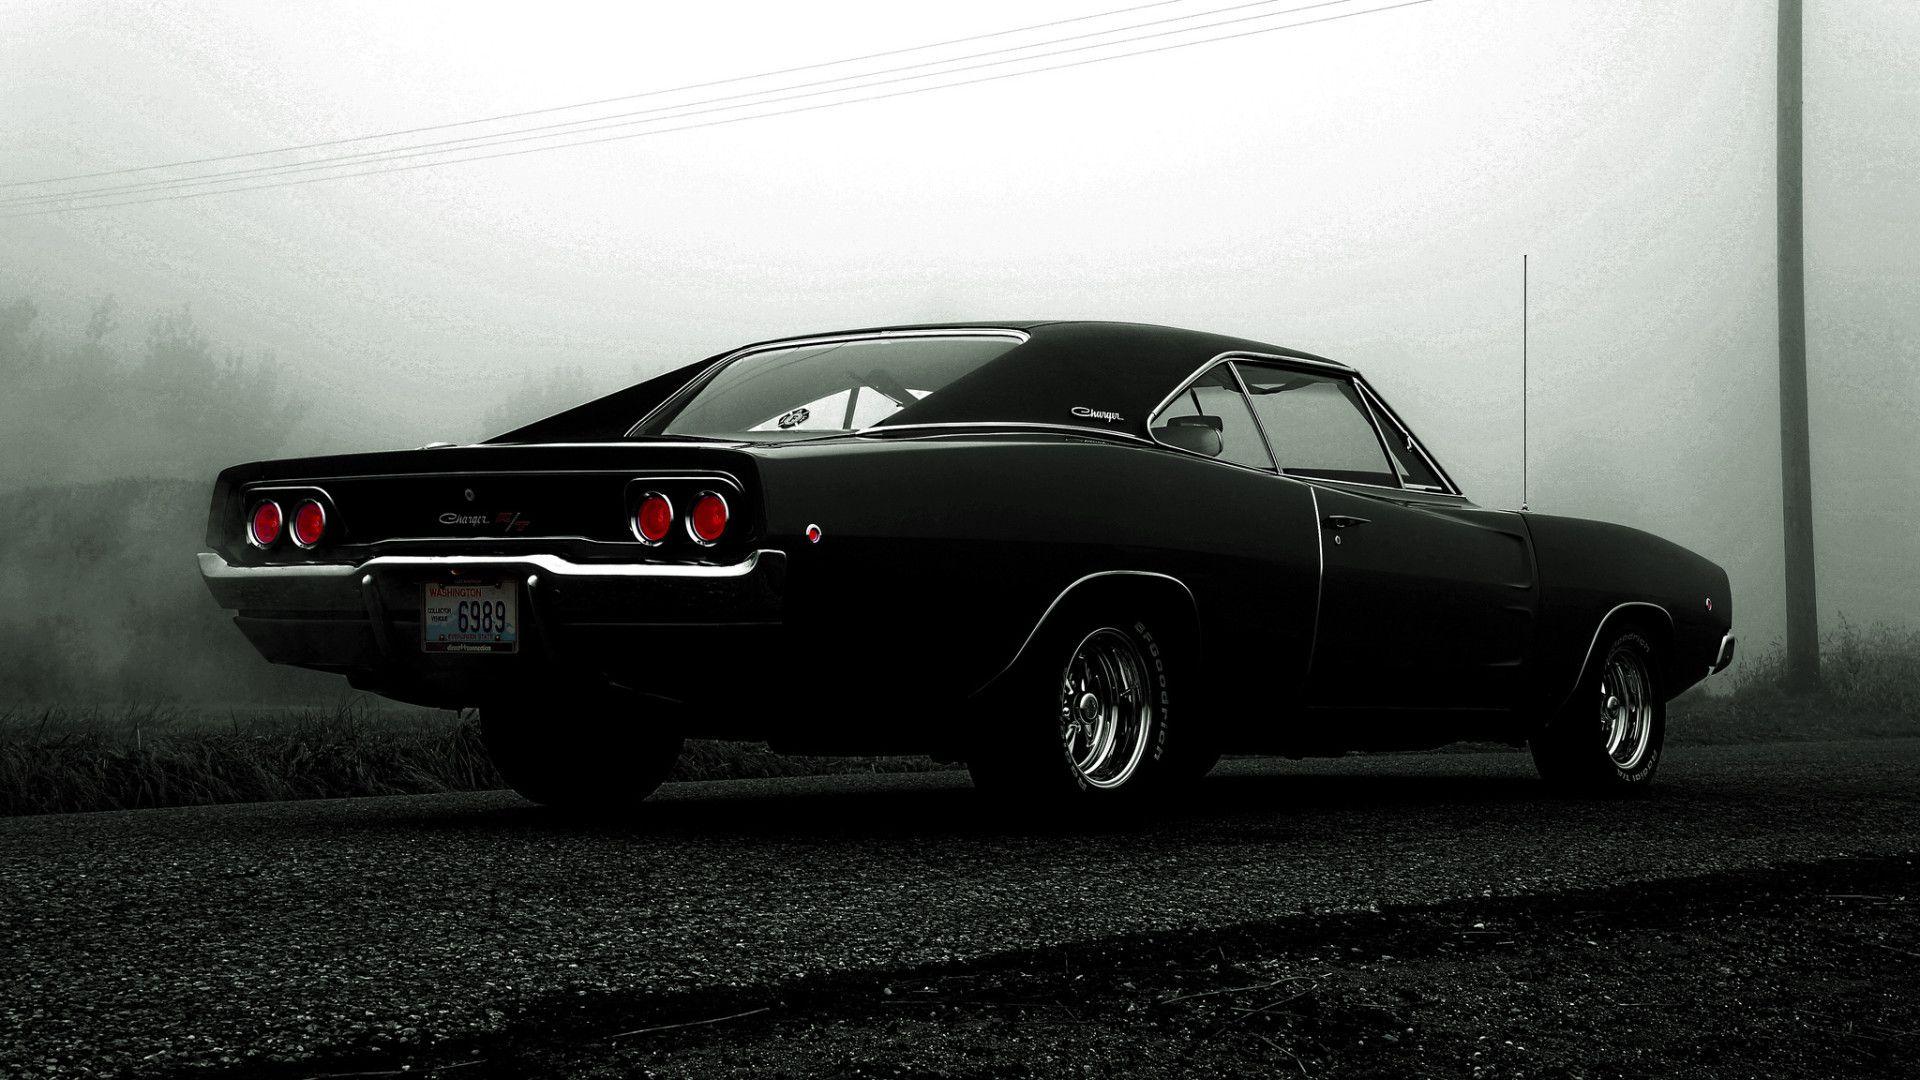 Dodge Charger Wallpapers 2K Photos, Wallpapers and other Wallpaper